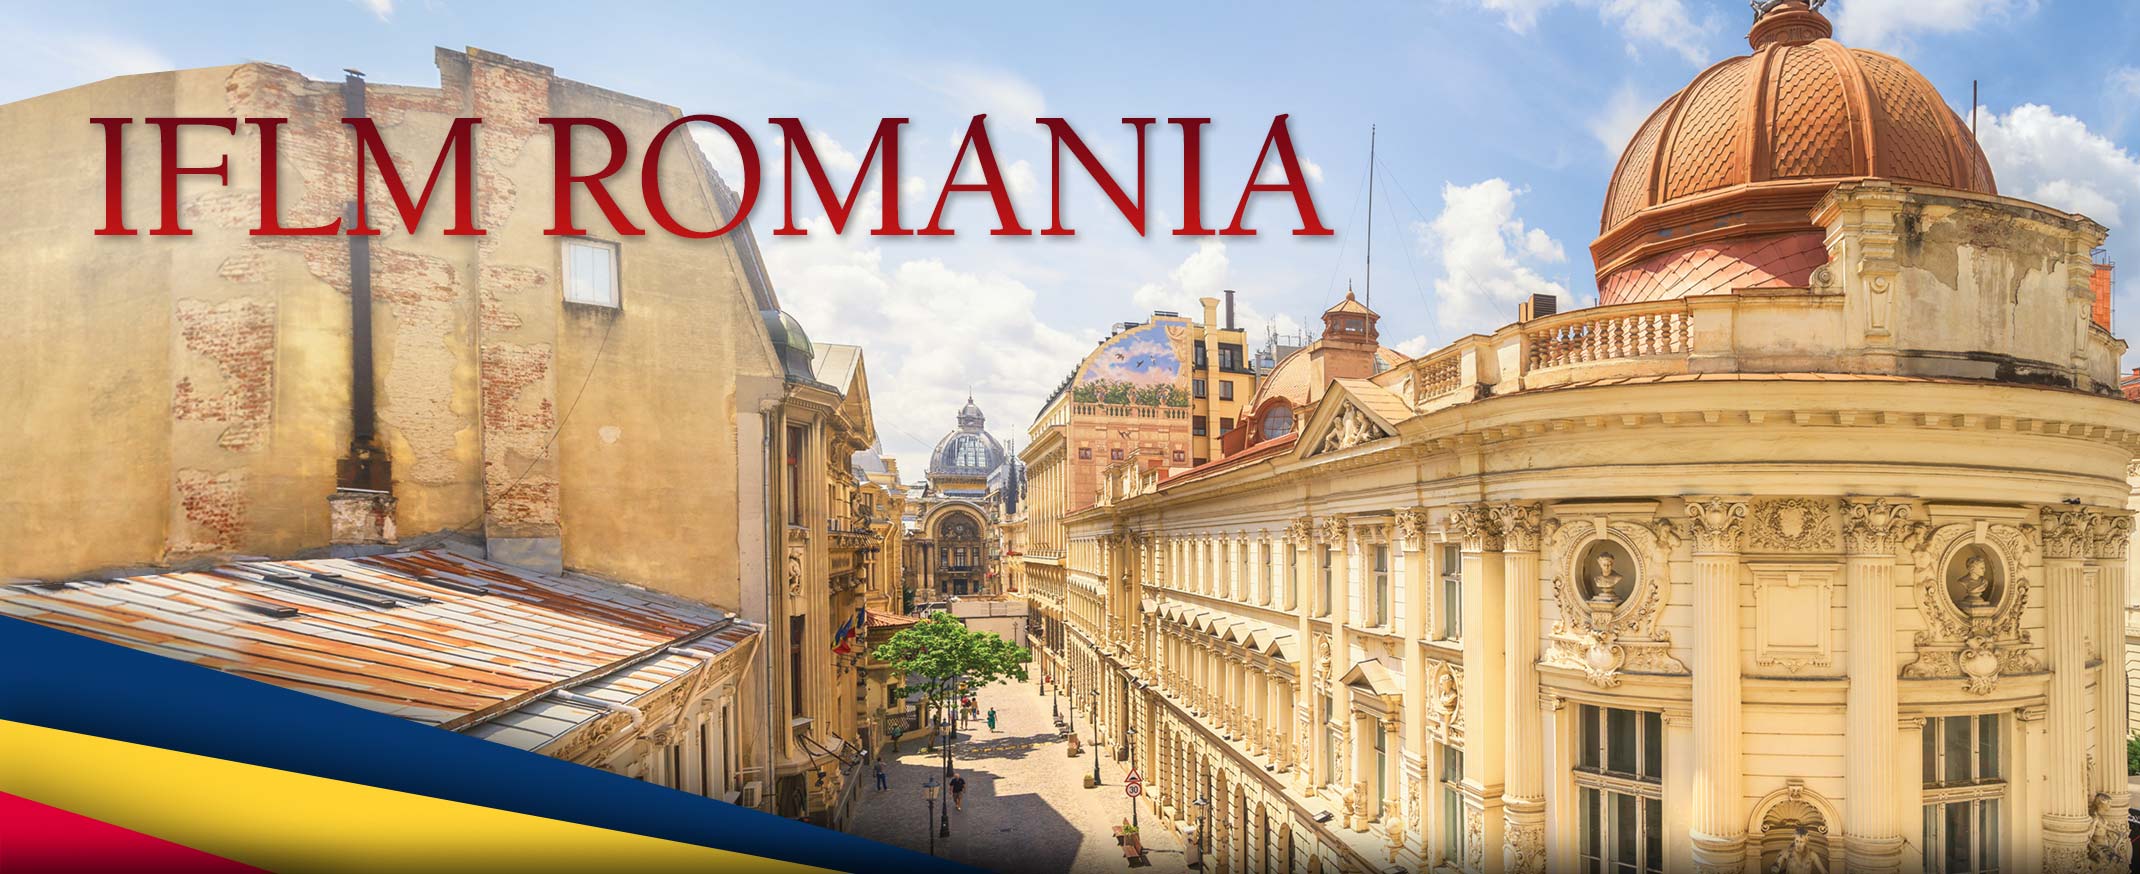 God's Word for the Romanian-Speaking World